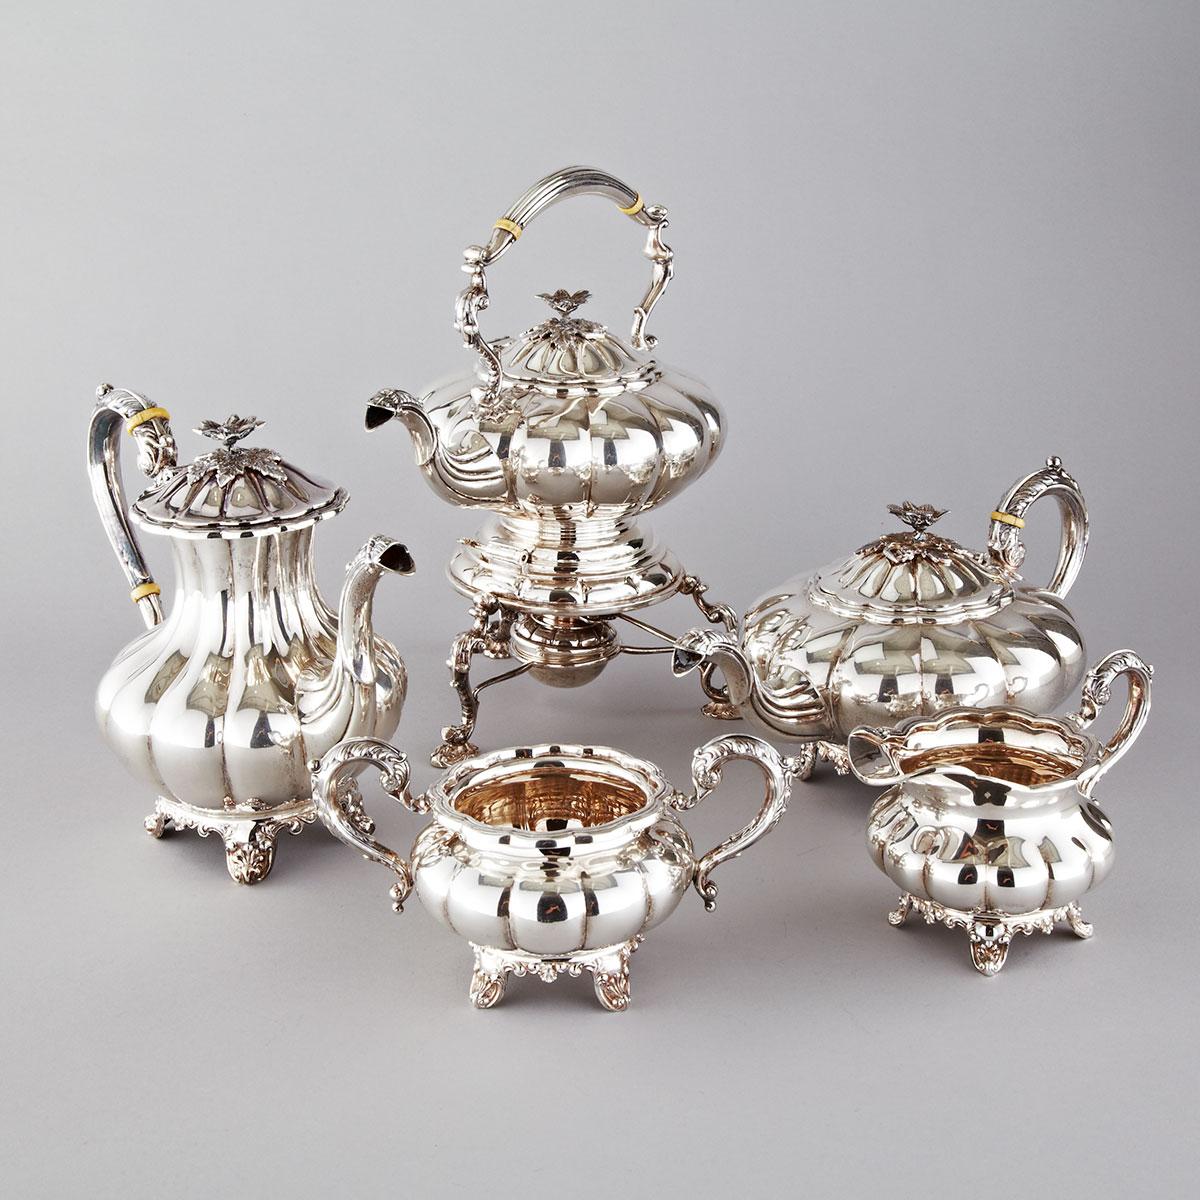 Canadian Silver Melon-Fluted Tea and Coffee Service, Henry Birks & Sons, Montreal, Que., 1965-71